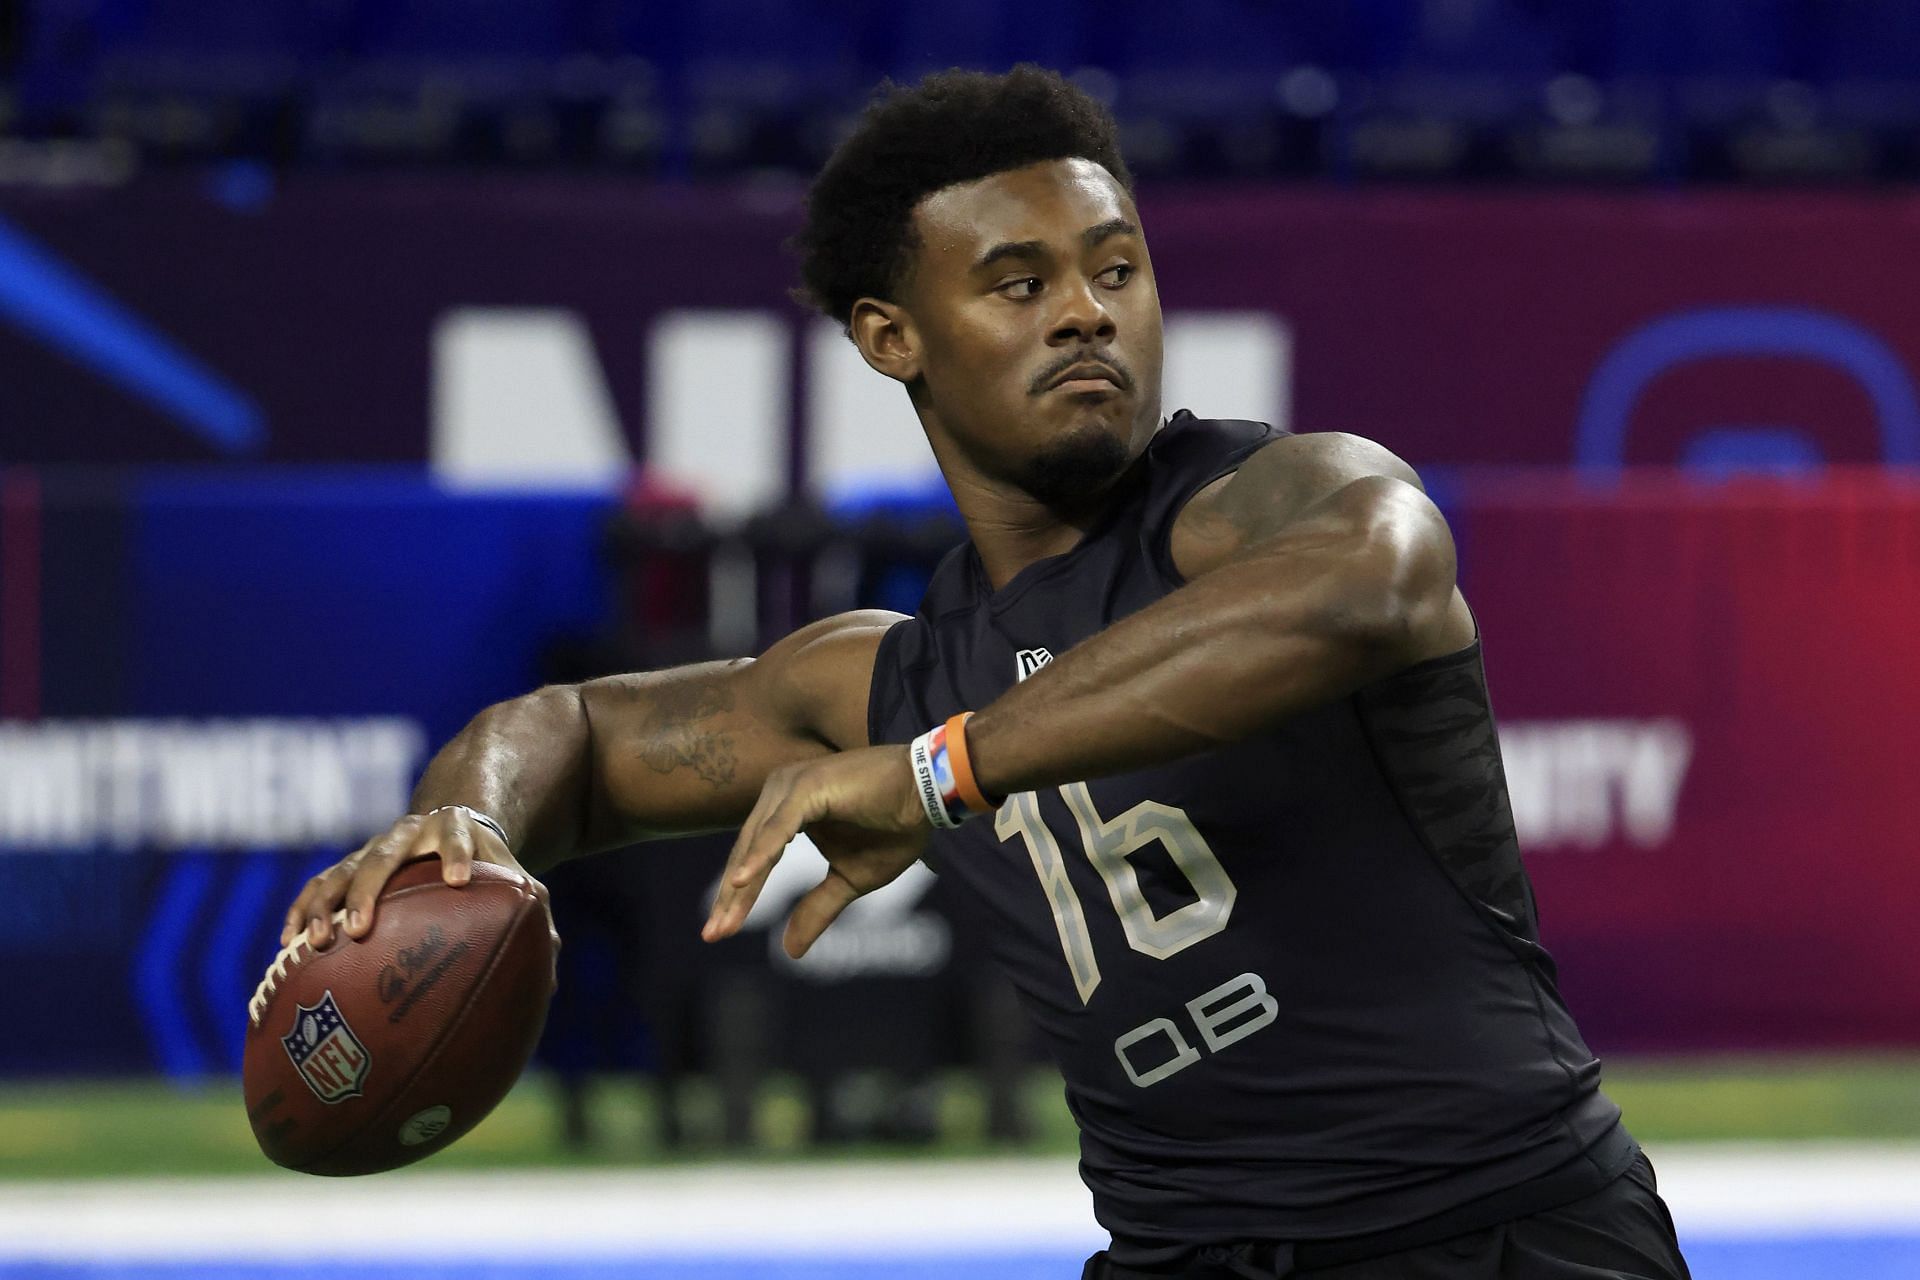 The Tennessee Titans got an impressive QB in the third round of the NFL Draft.